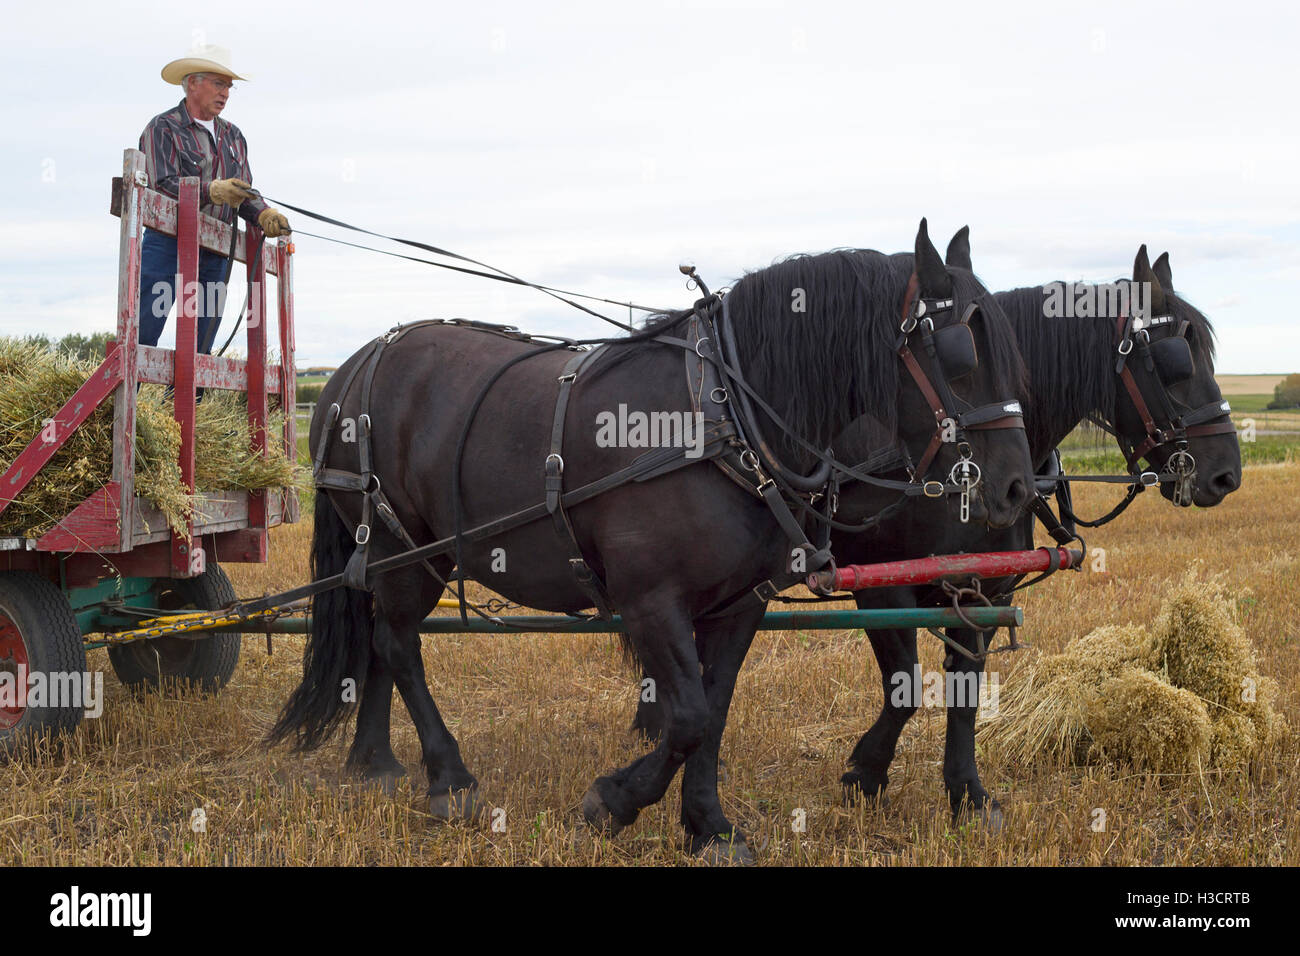 Man driving horse drawn wagon with Percheron two horse team to collect oat stooks during harvest in Alberta farmland, western Canada Stock Photo